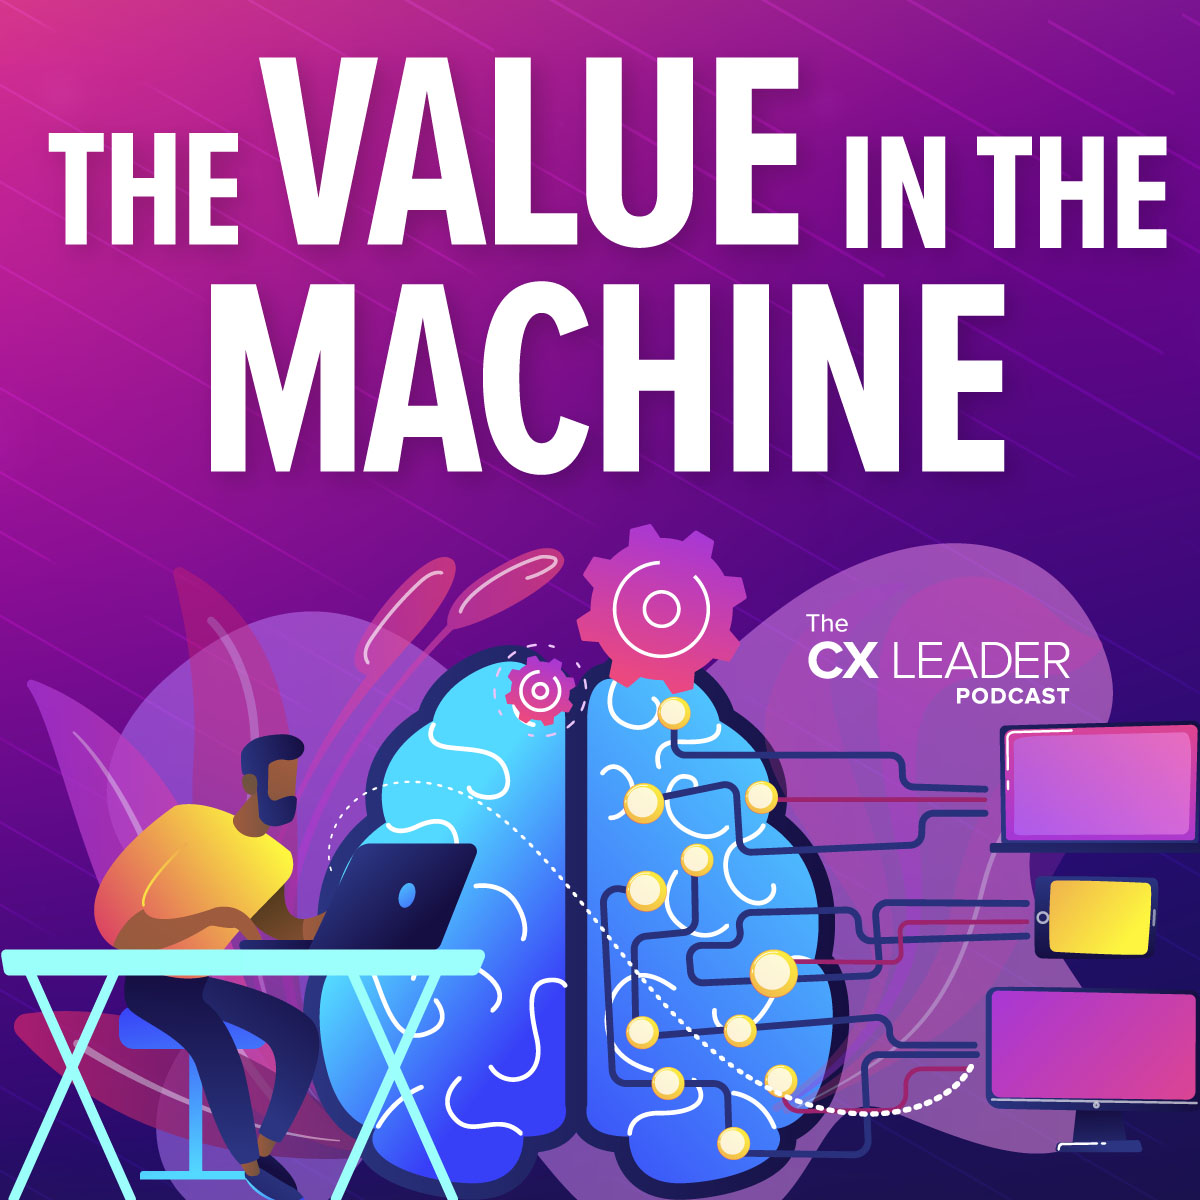 The Value in the Machine